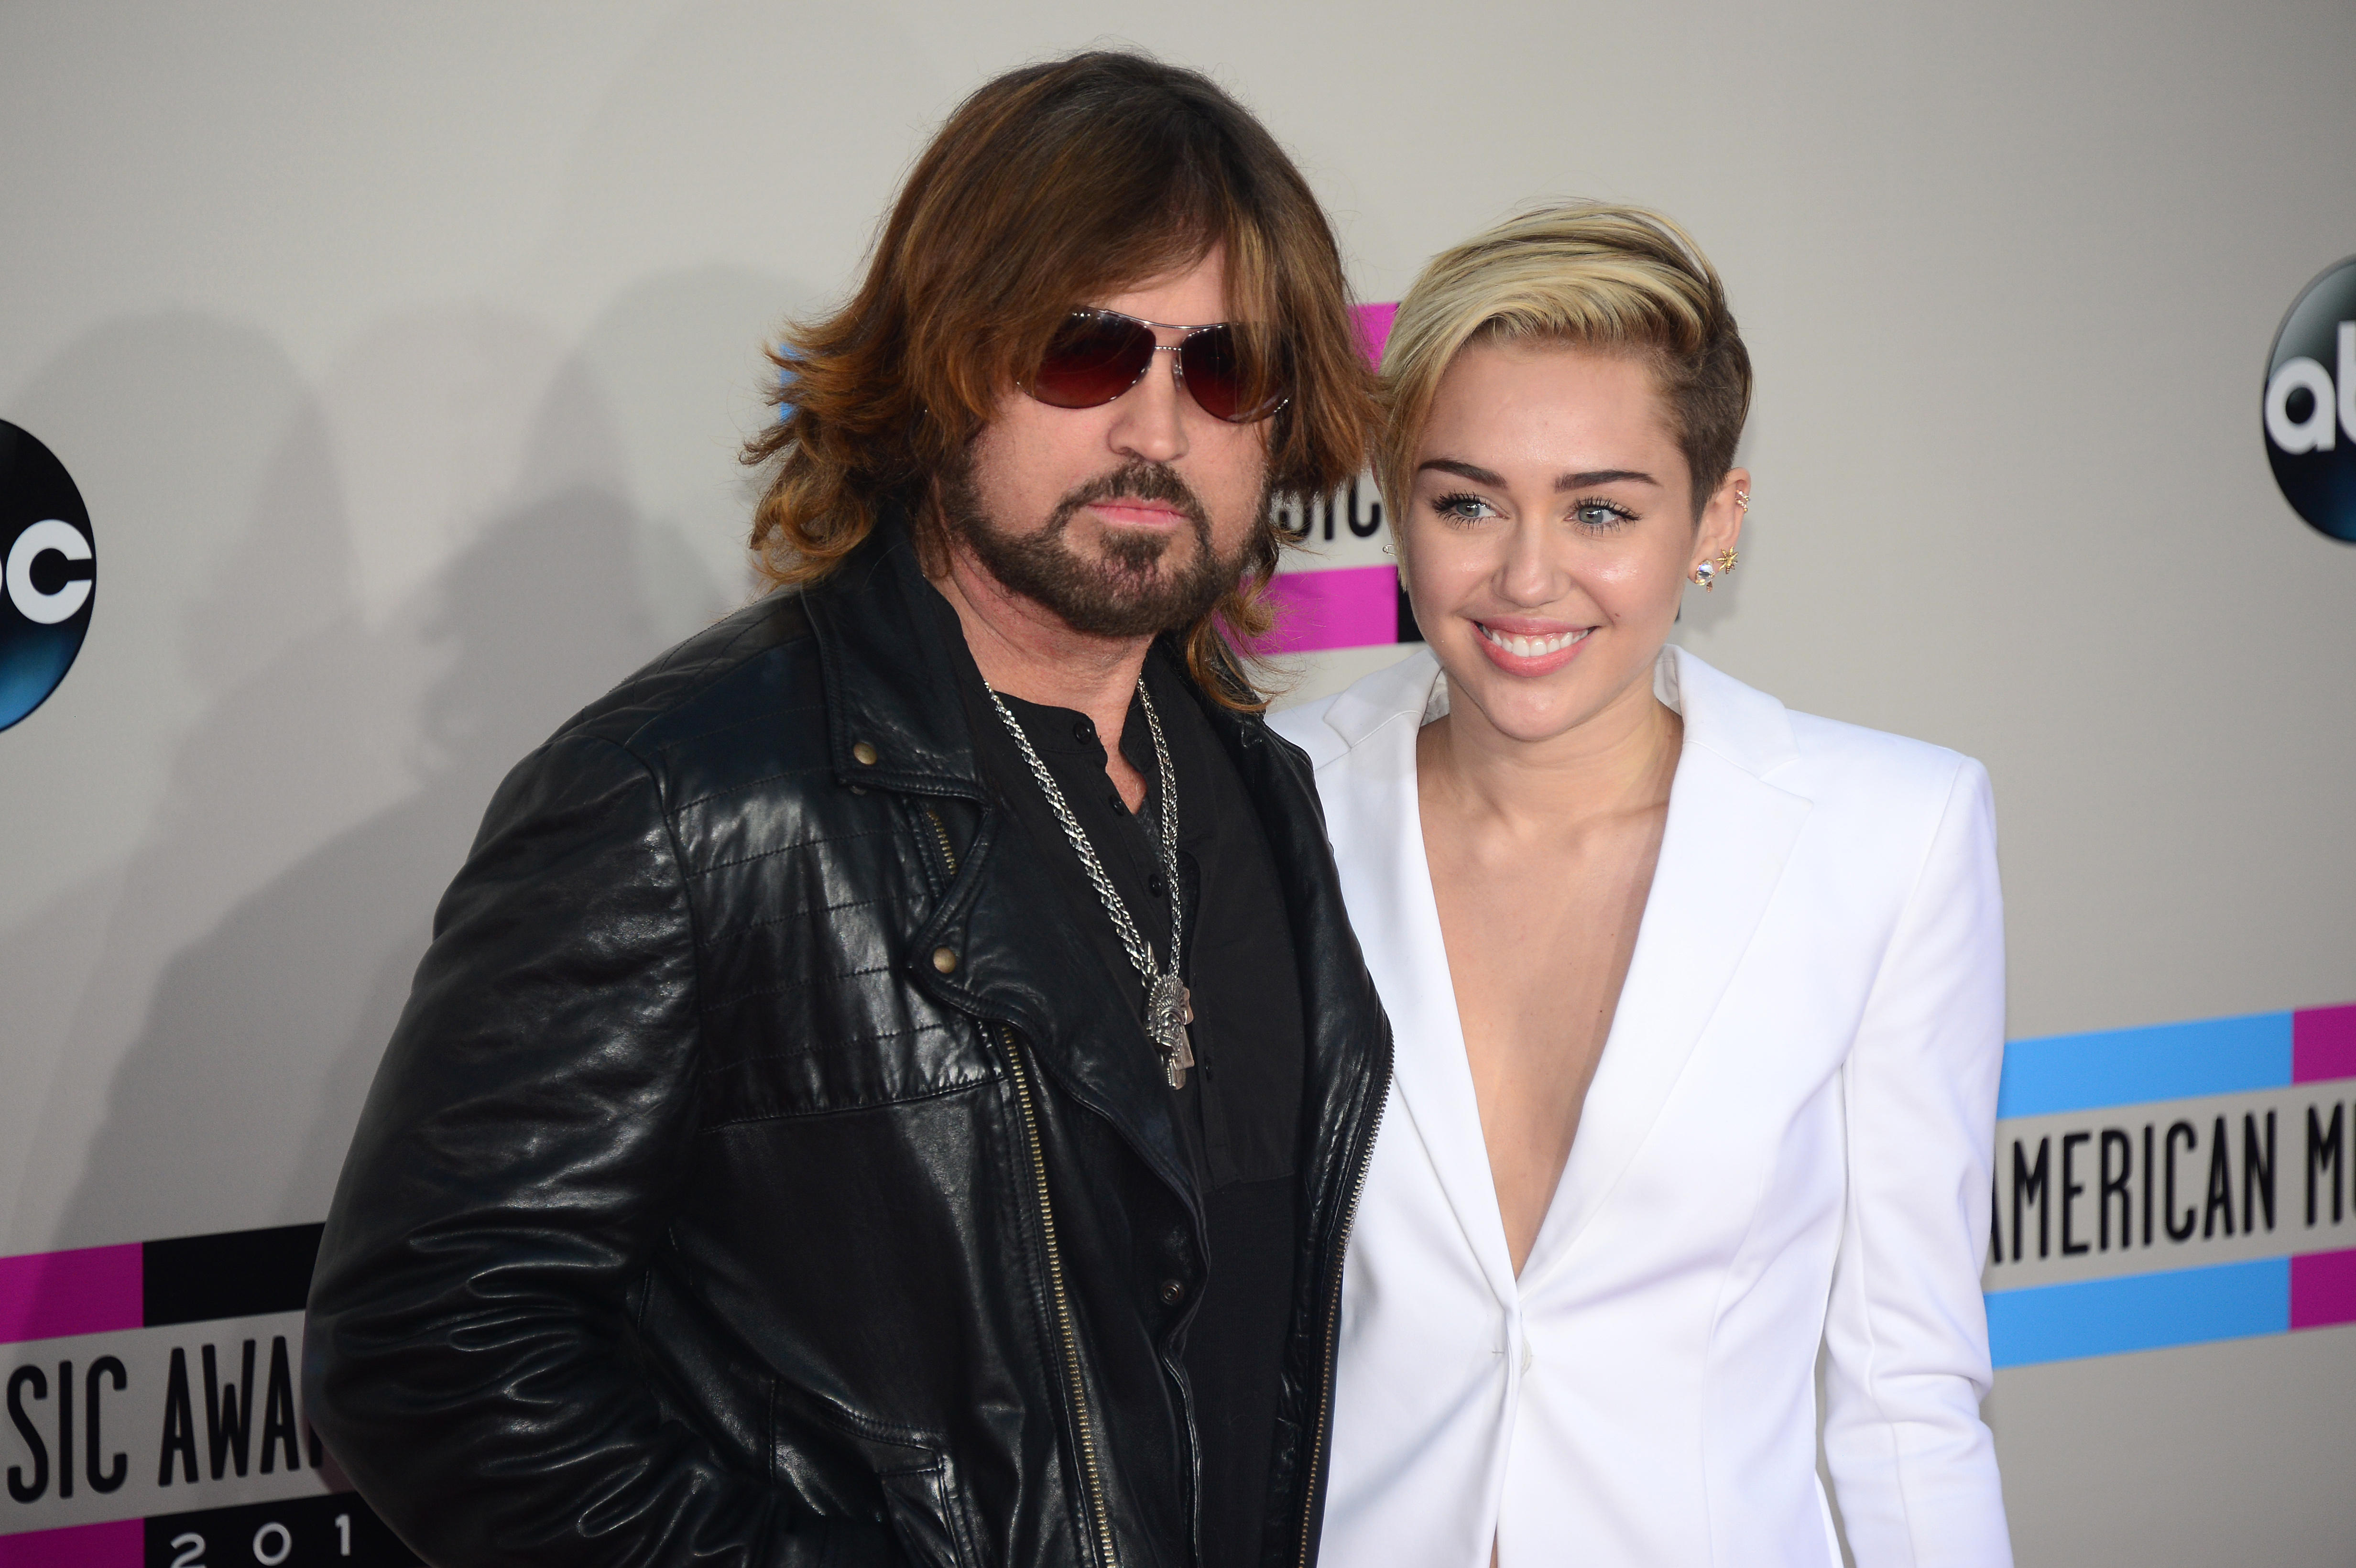 Billy Ray Cyrus opens up on Miley Cyrus’ new music CBS News